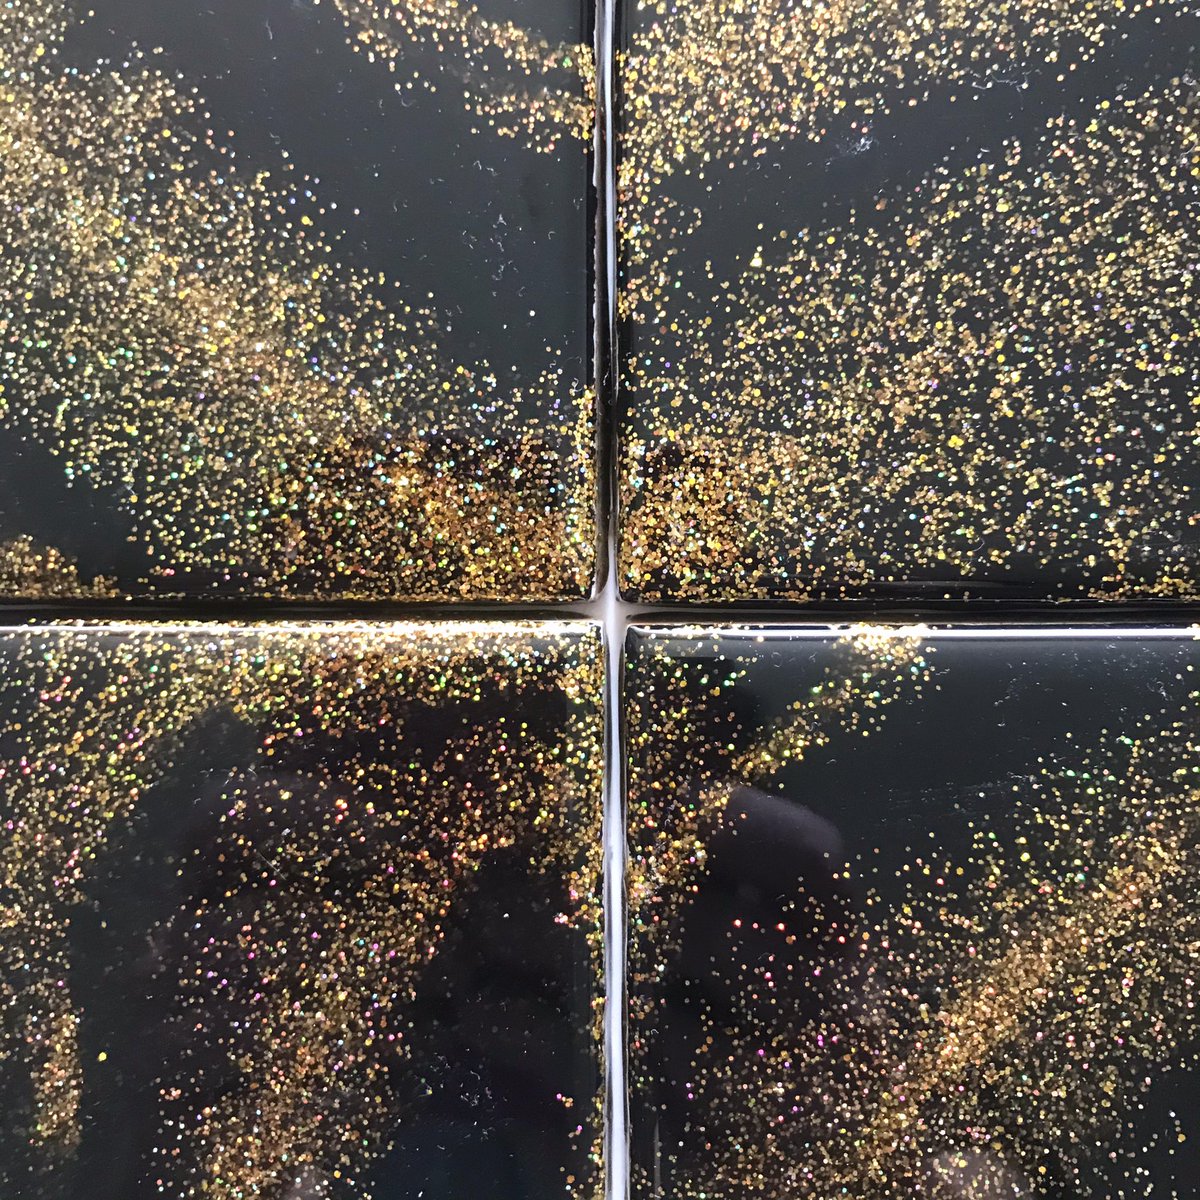 Good morning, introducing, my new black & gold, resin coaster tiles, great for adding a bit of glam to the table, these will be at The artisan market in Hampstead tomorrow BH Monday 10-5 #UKGiftHour #UKGiftAM #ukweekendhour #shopindie #onlinecraft